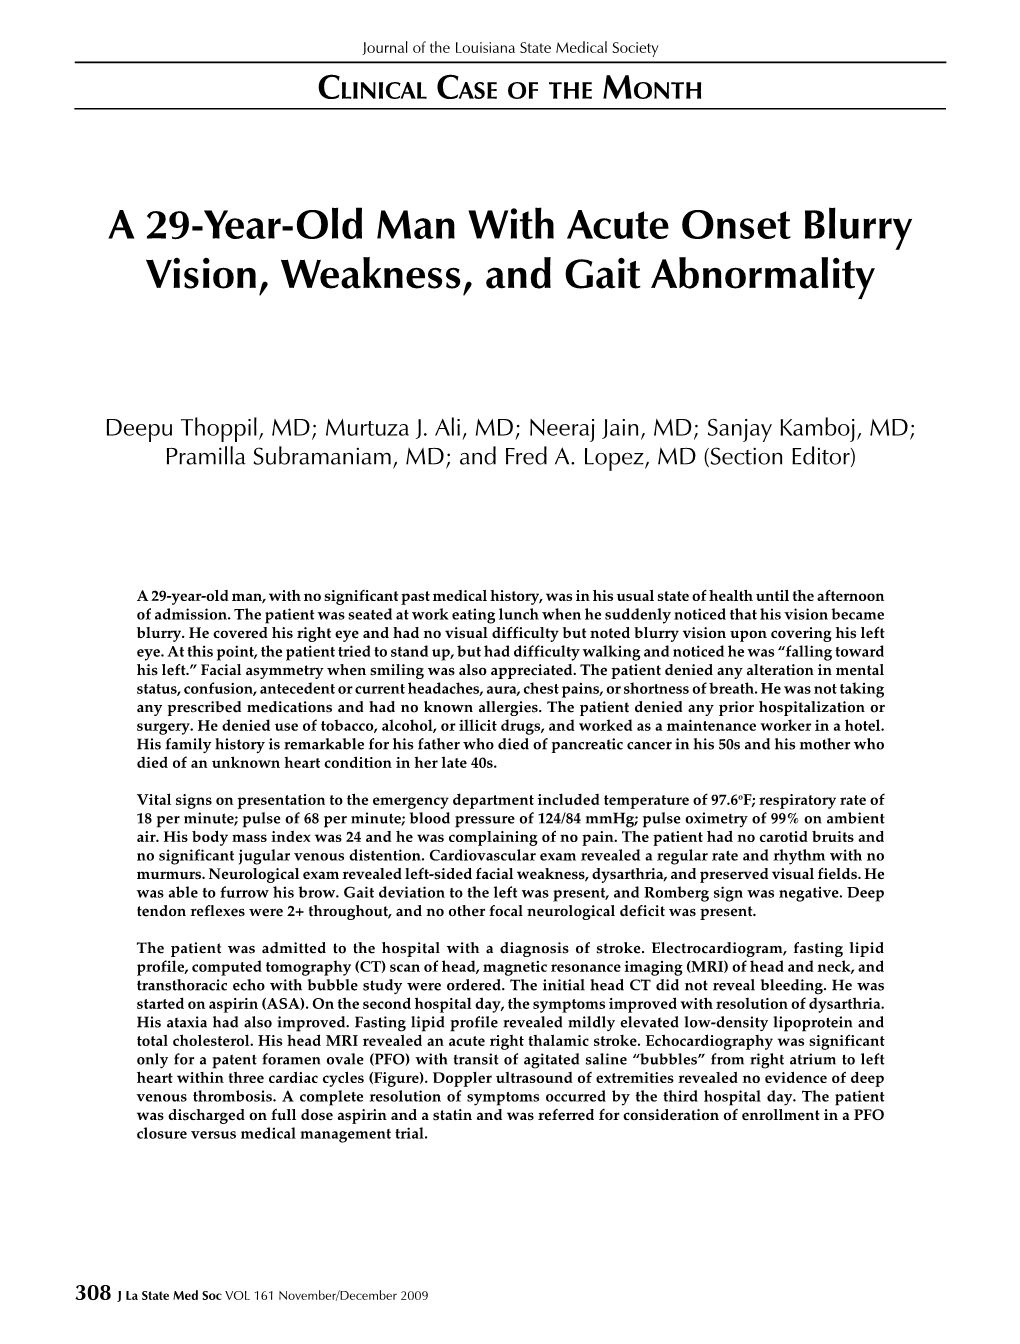 A 29-Year-Old Man with Acute Onset Blurry Vision, Weakness, and Gait Abnormality